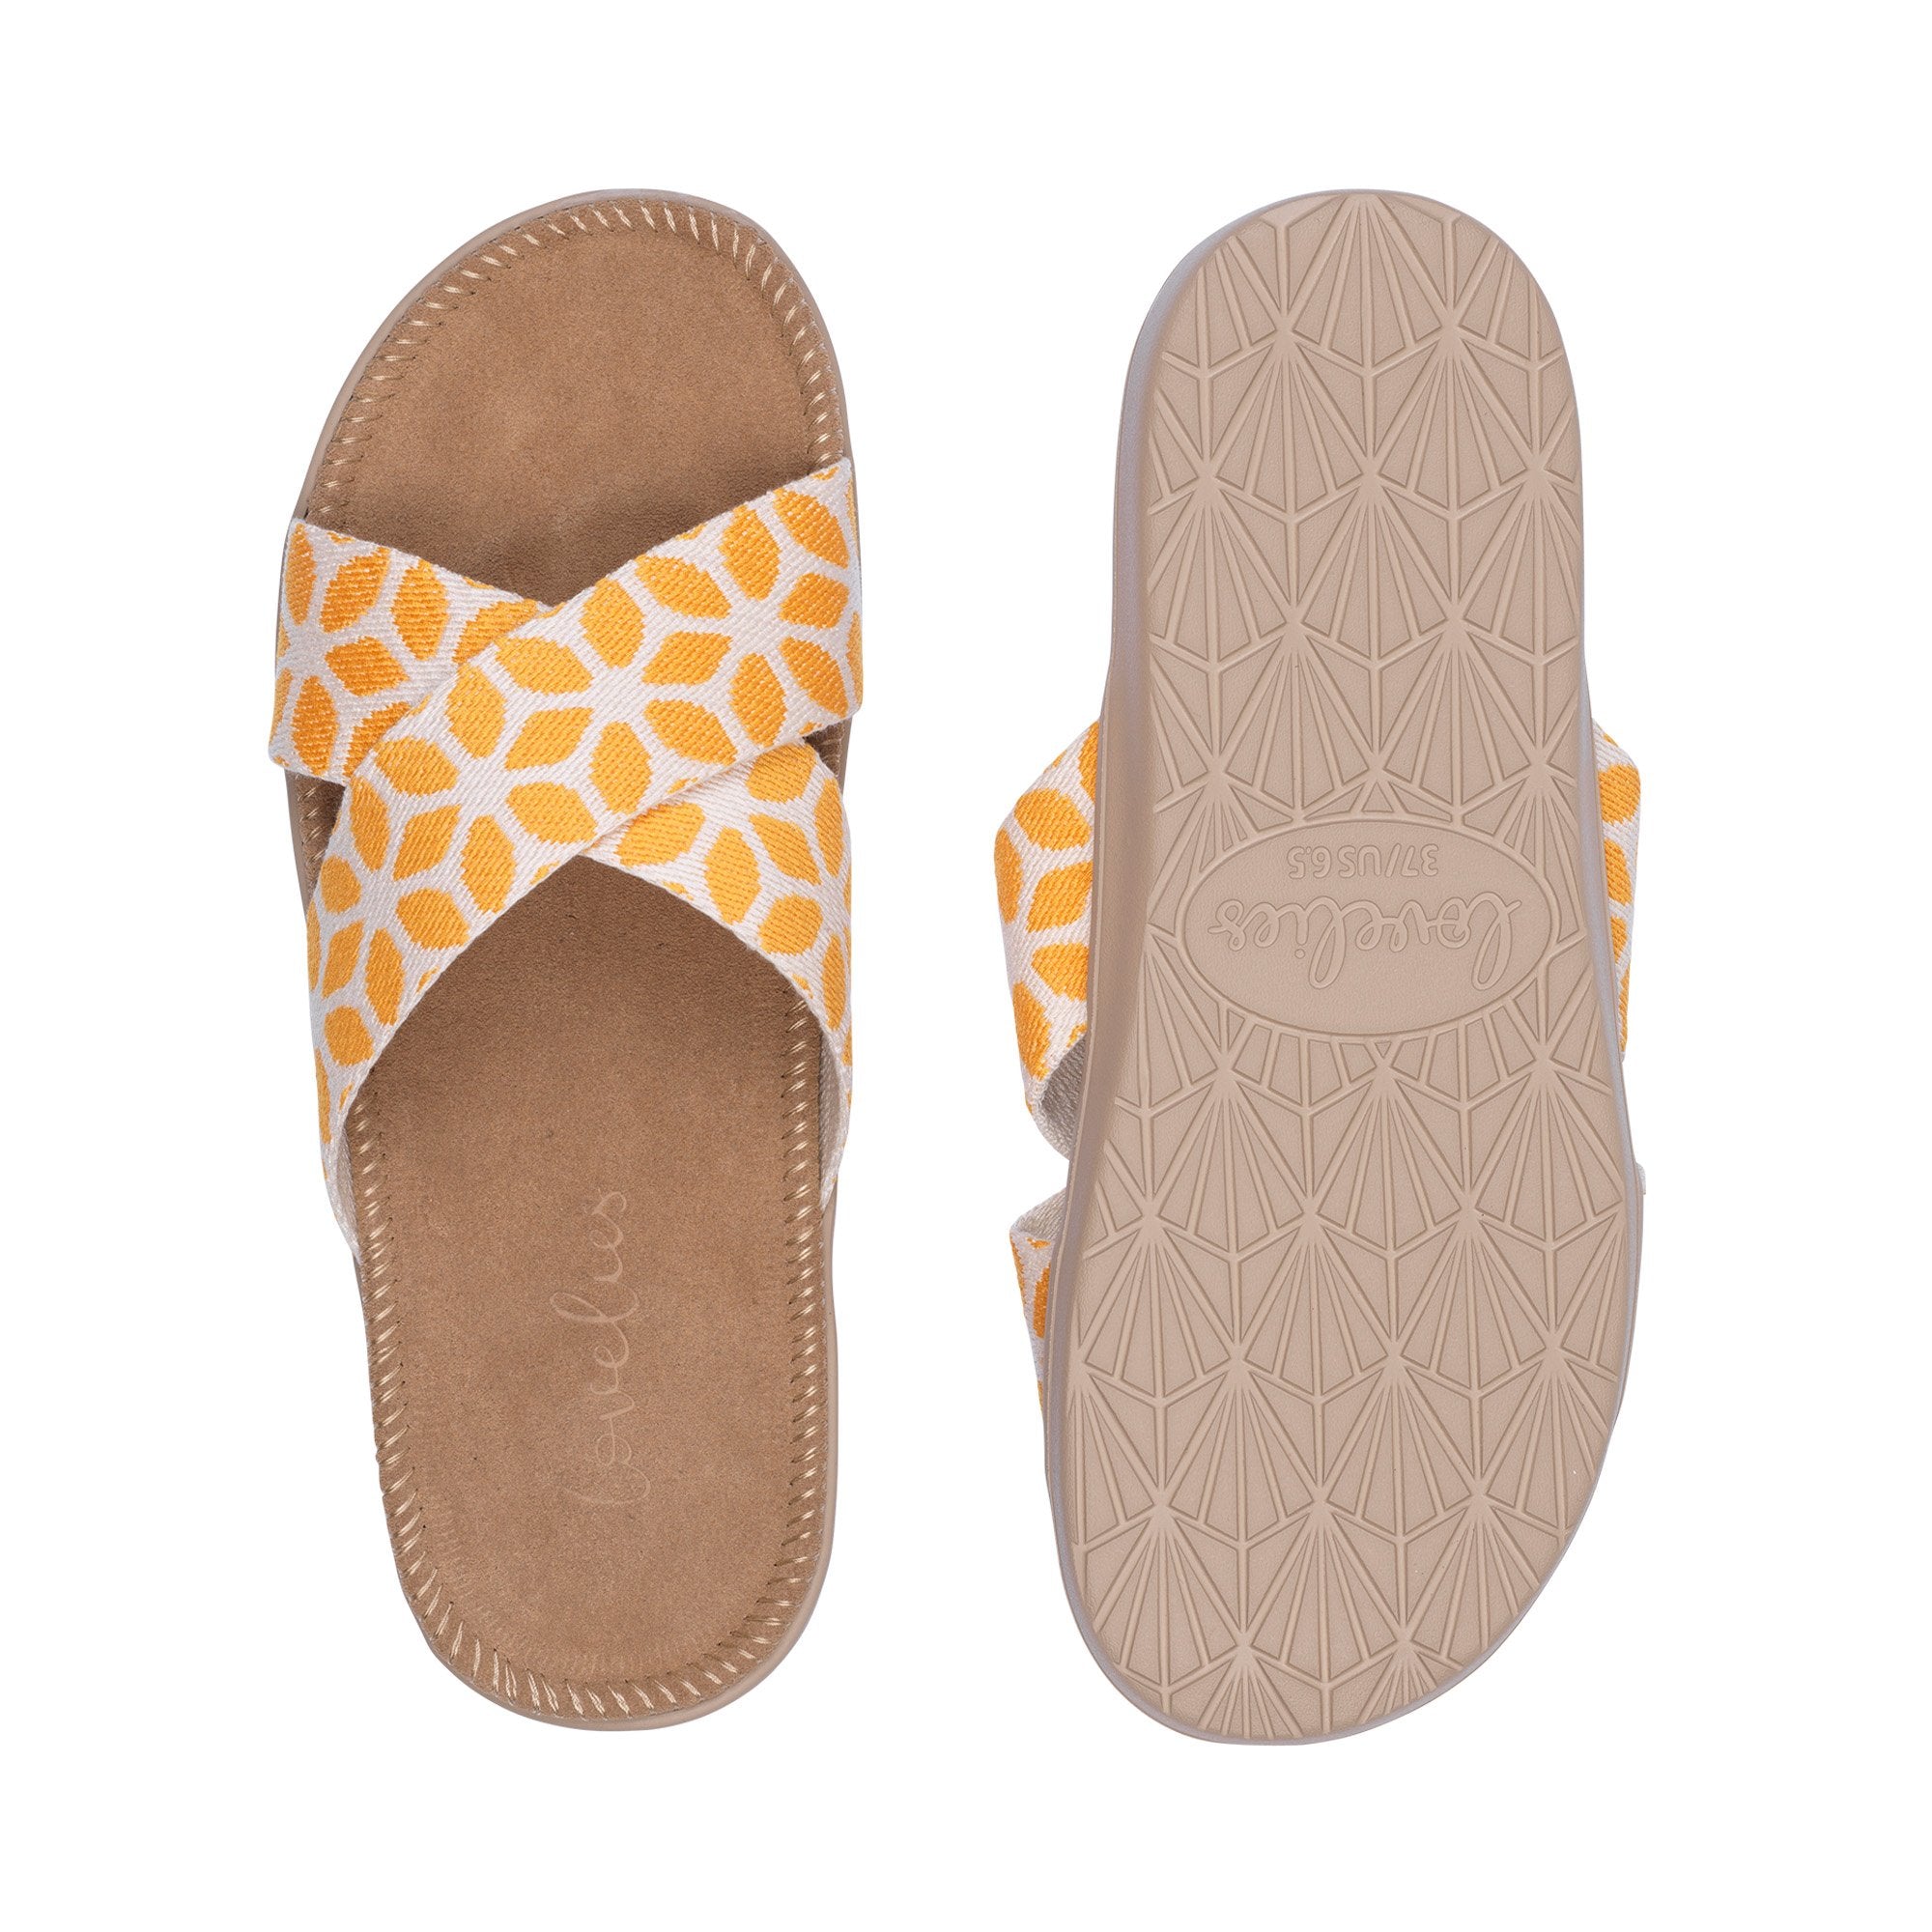 Sandal with flower woven straps. The comfortable inner sole is covered with soft brown suede.